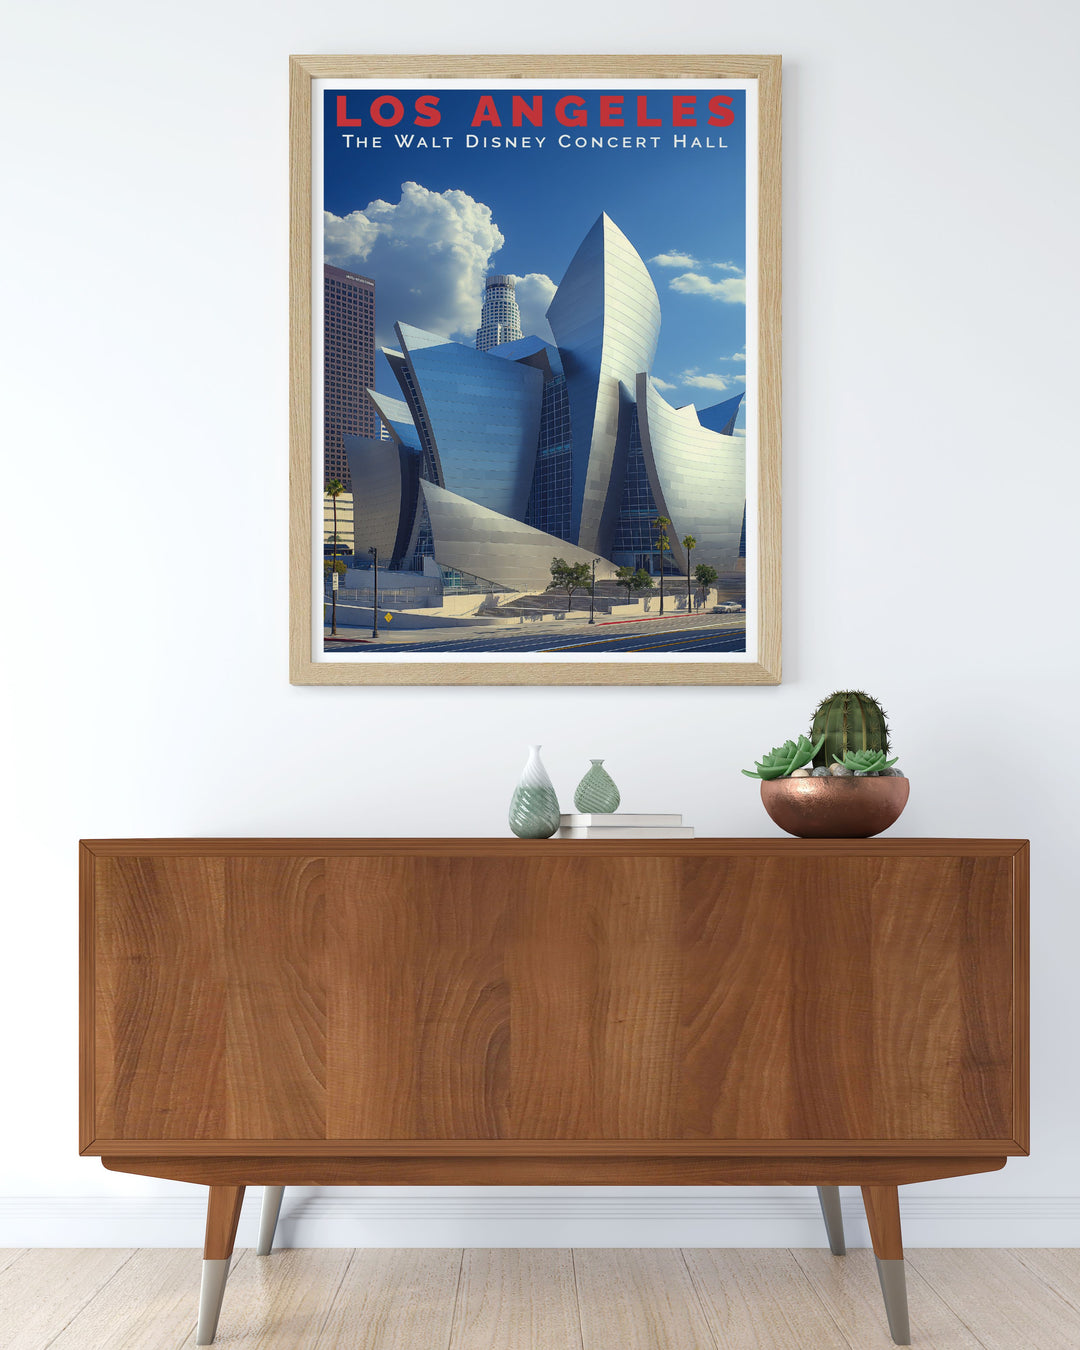 Featuring the picturesque Walt Disney Concert Hall, this poster offers a visual representation of one of Californias most beloved architectural landmarks, ideal for art and architecture enthusiasts.